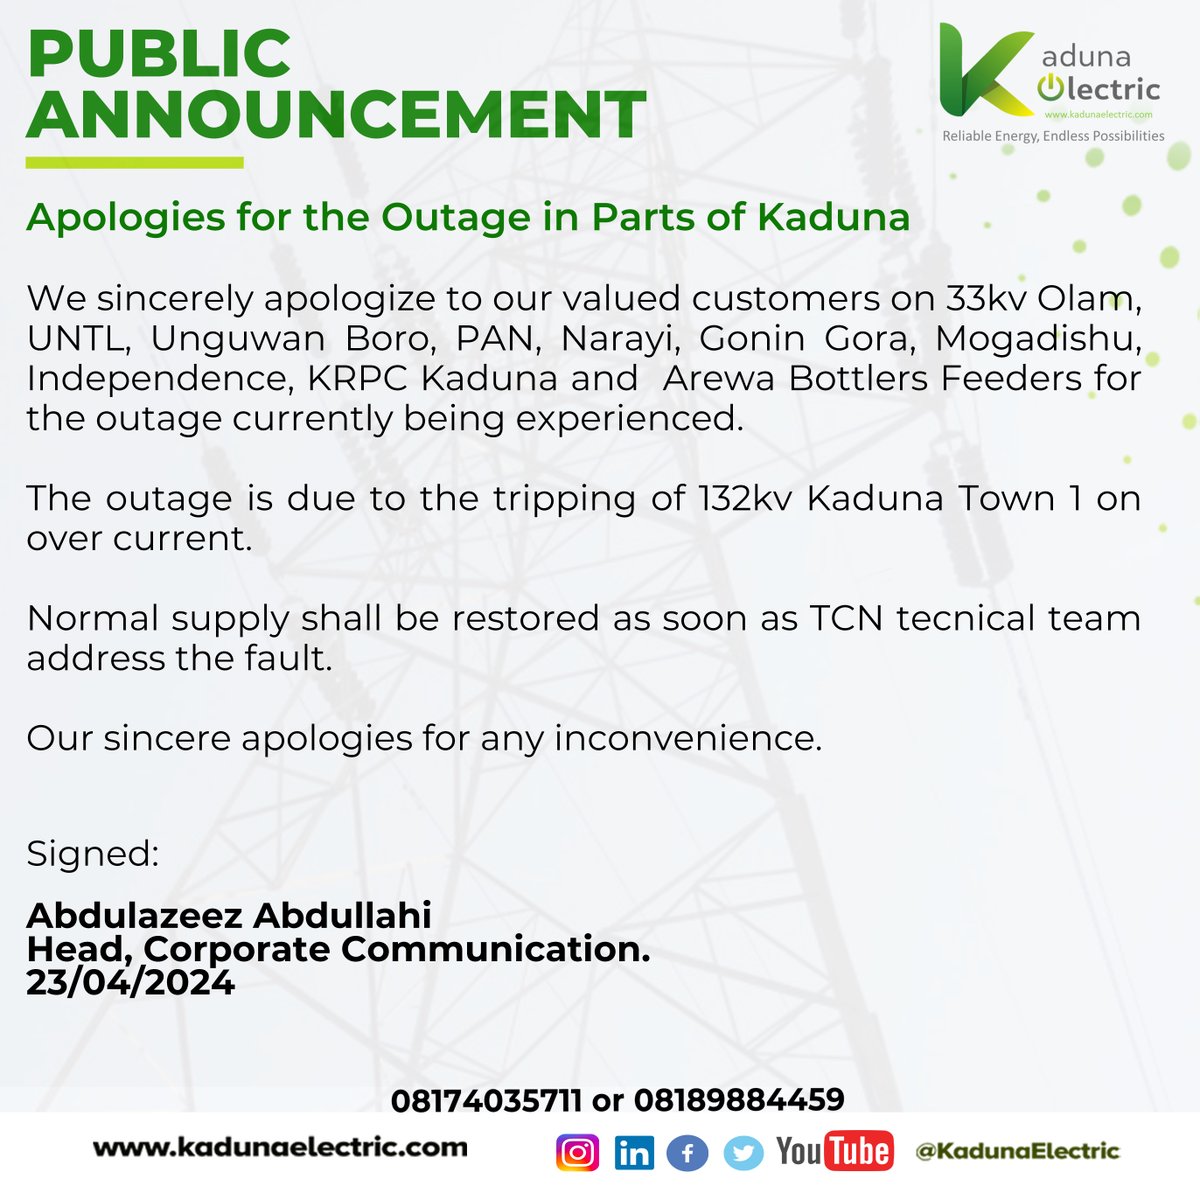 Apologies for the Outage in Parts of Kaduna